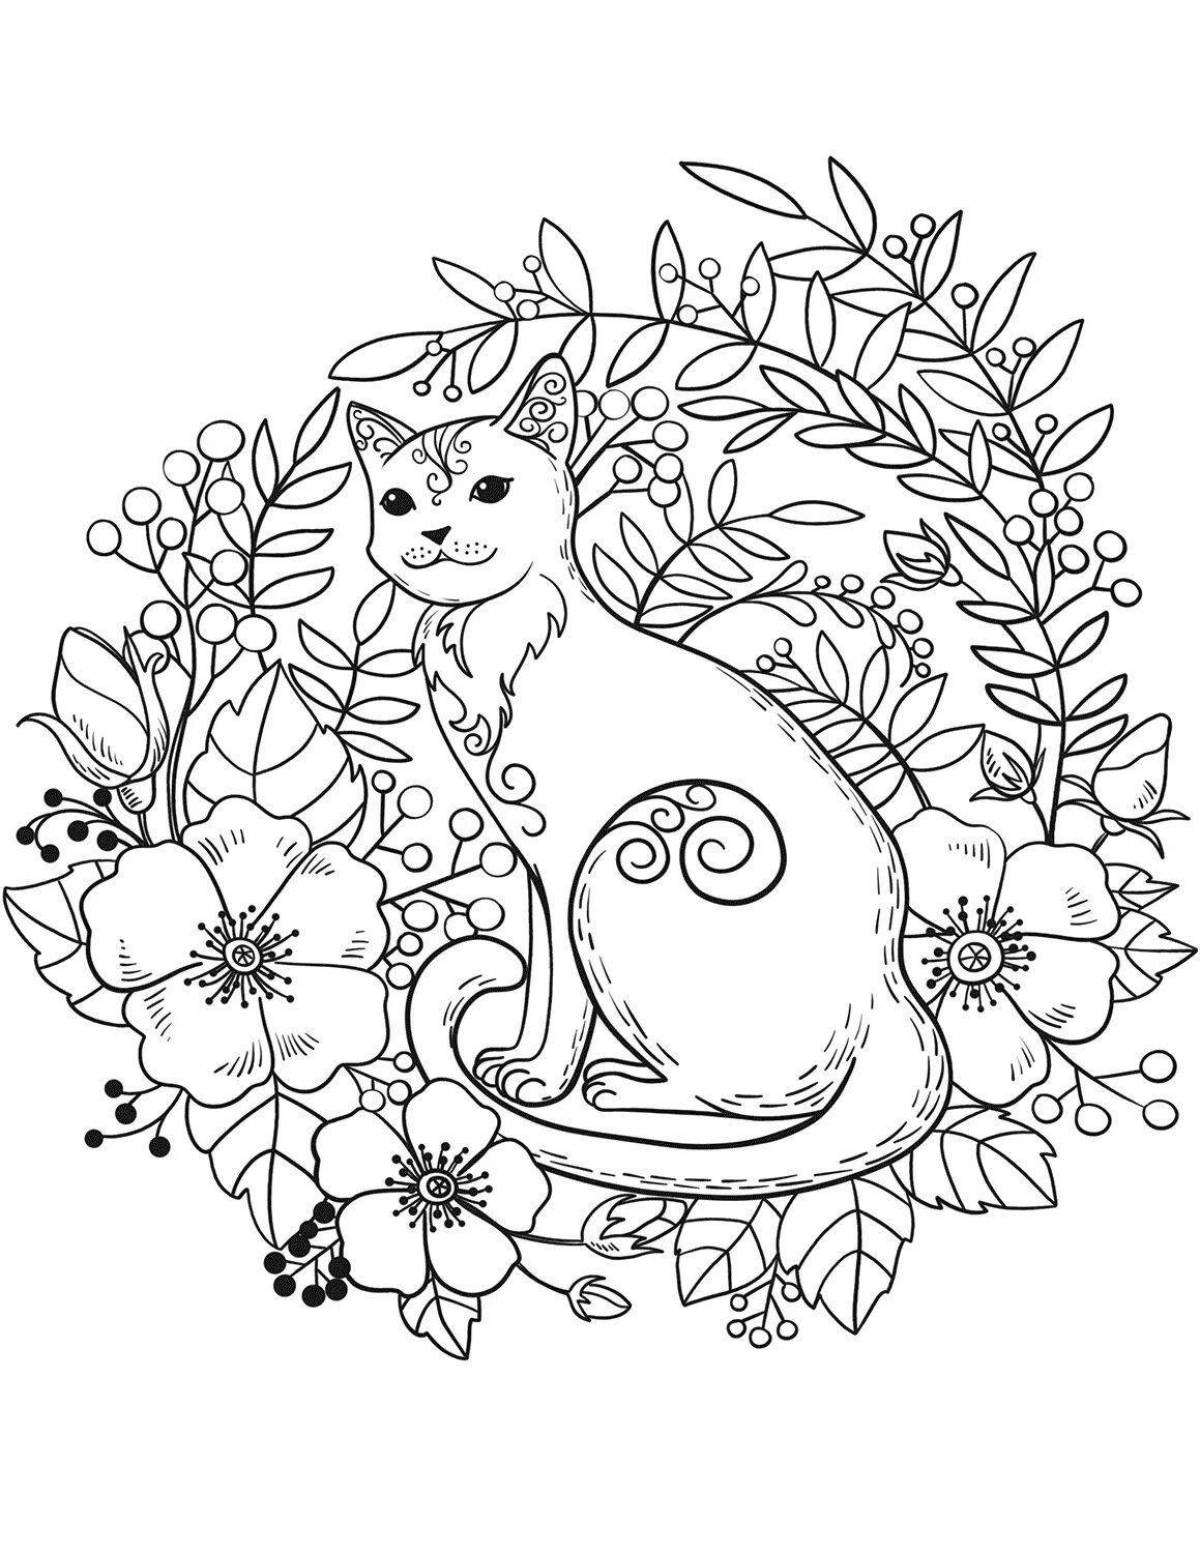 Adorable 10 year old animal coloring book